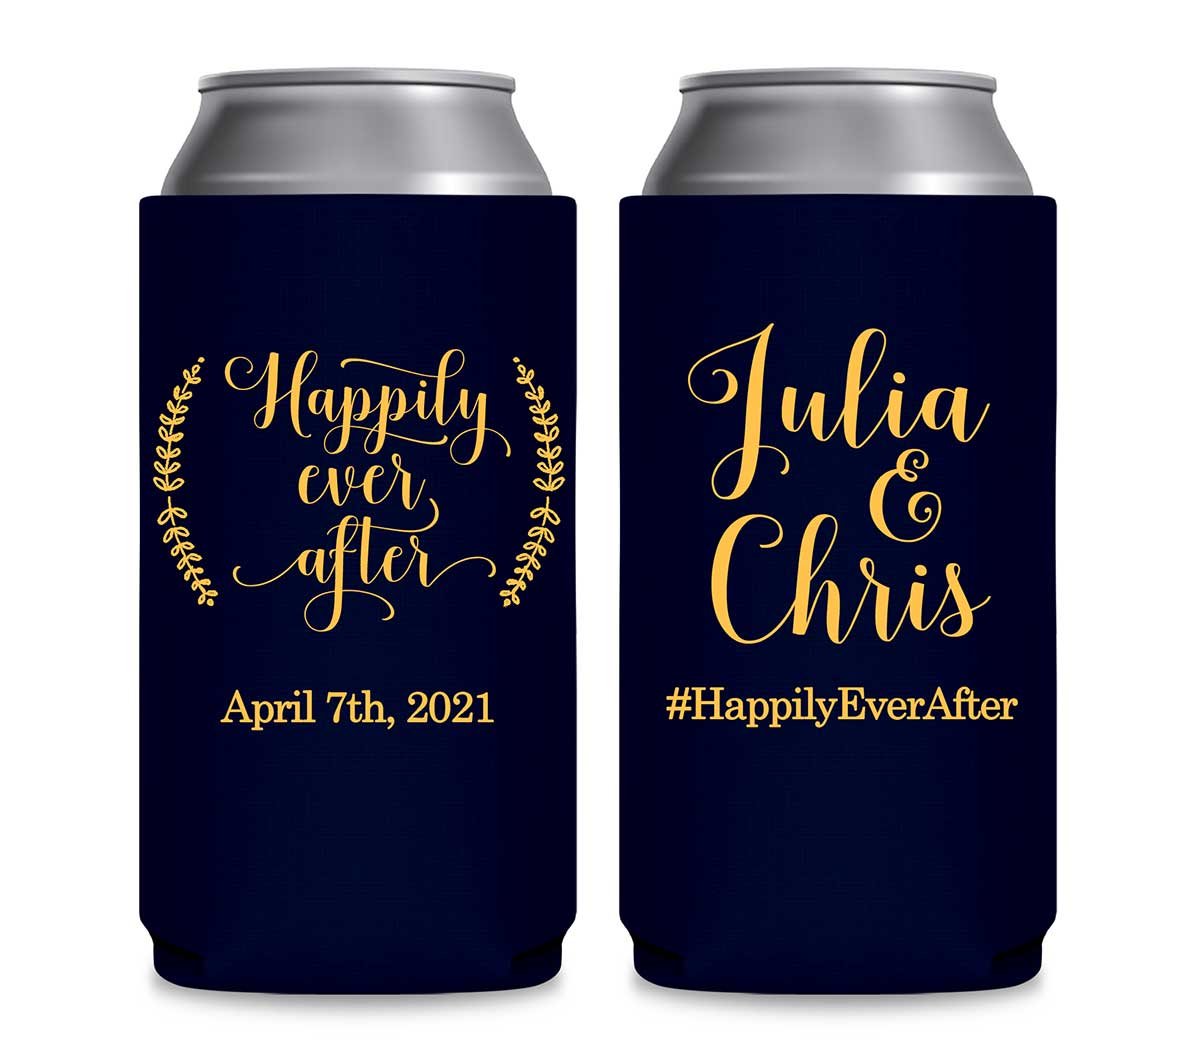 Happily Ever After 2A Foldable 12 oz Slim Can Koozies Wedding Gifts for Guests